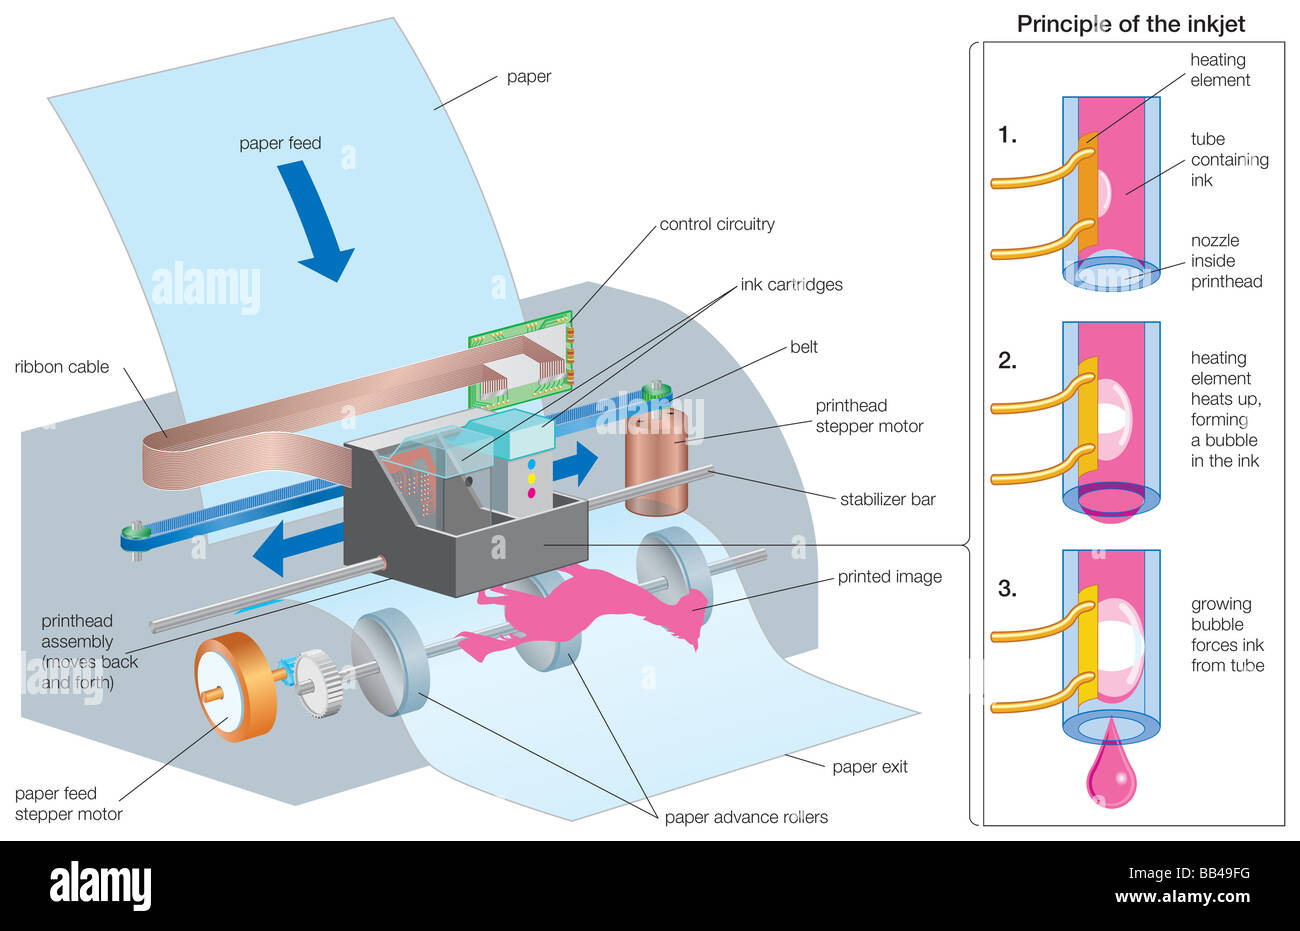 Diagram of the operating process of an inkjet printer Stock Photo - Alamy